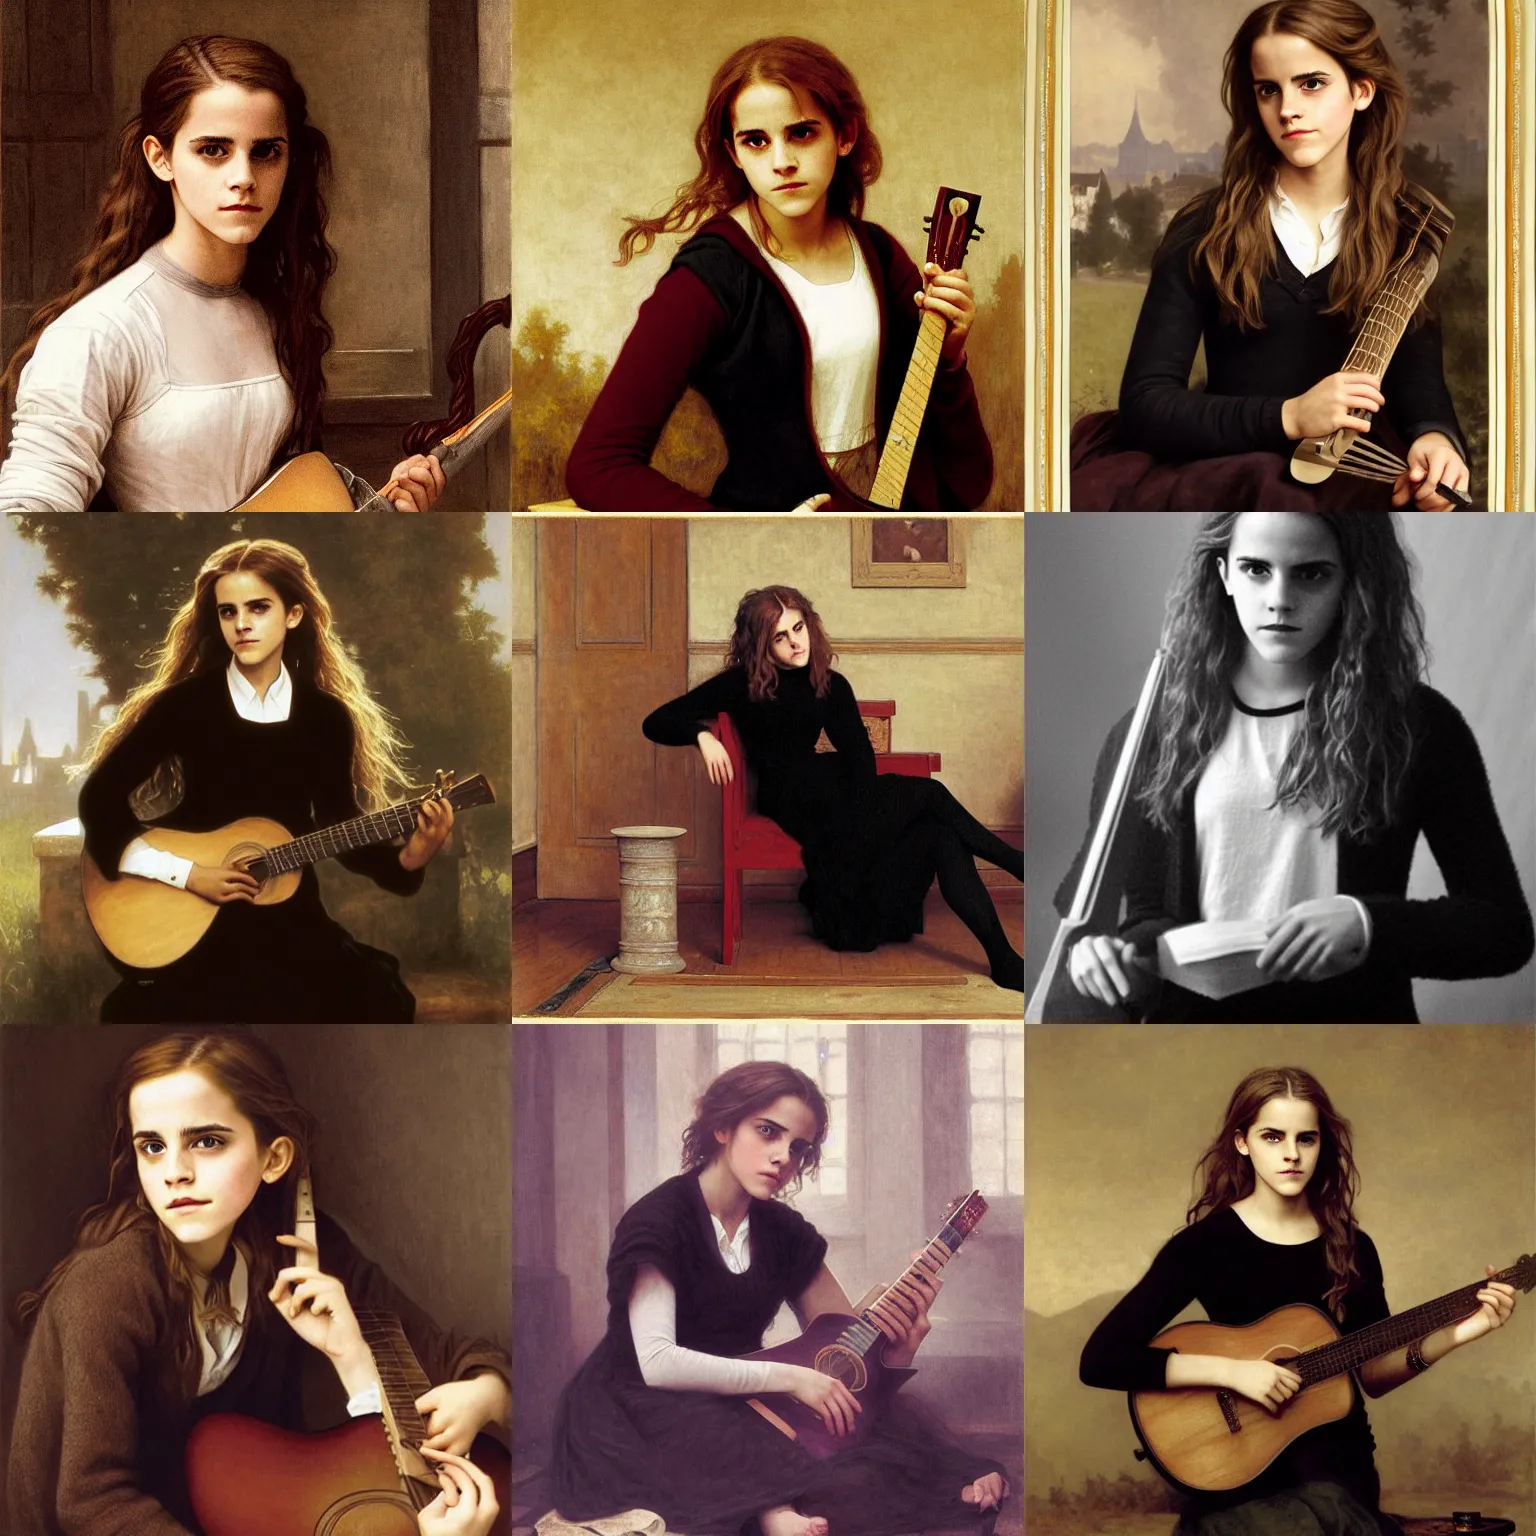 Prompt: Emma Watson/Hermione Granger wearing a black sweater, playing a guitar, in the Gryffindor common room, portrait photo by William-Adolphe Bouguereau